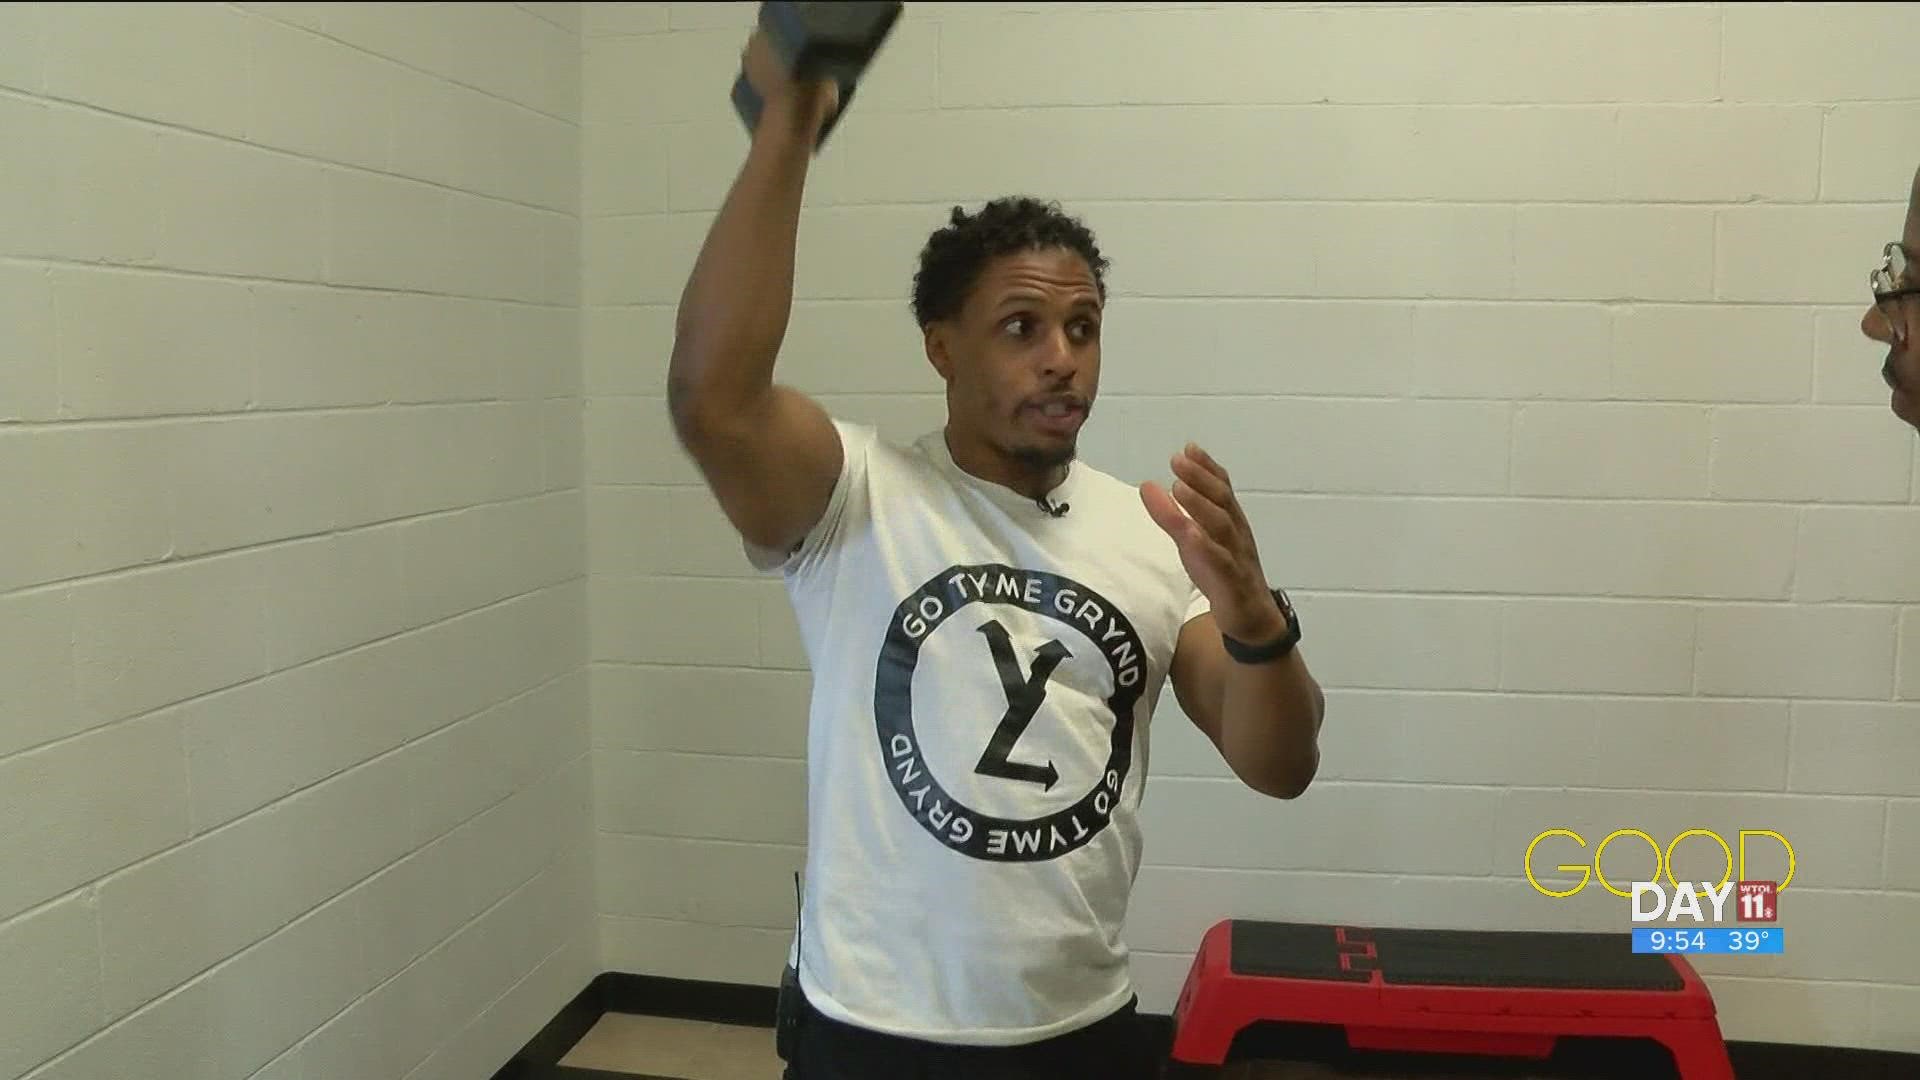 Deandre Gaston of Ohio Go Tyme Grynd Fitness shows Steven some best practice for free weights and lifting.